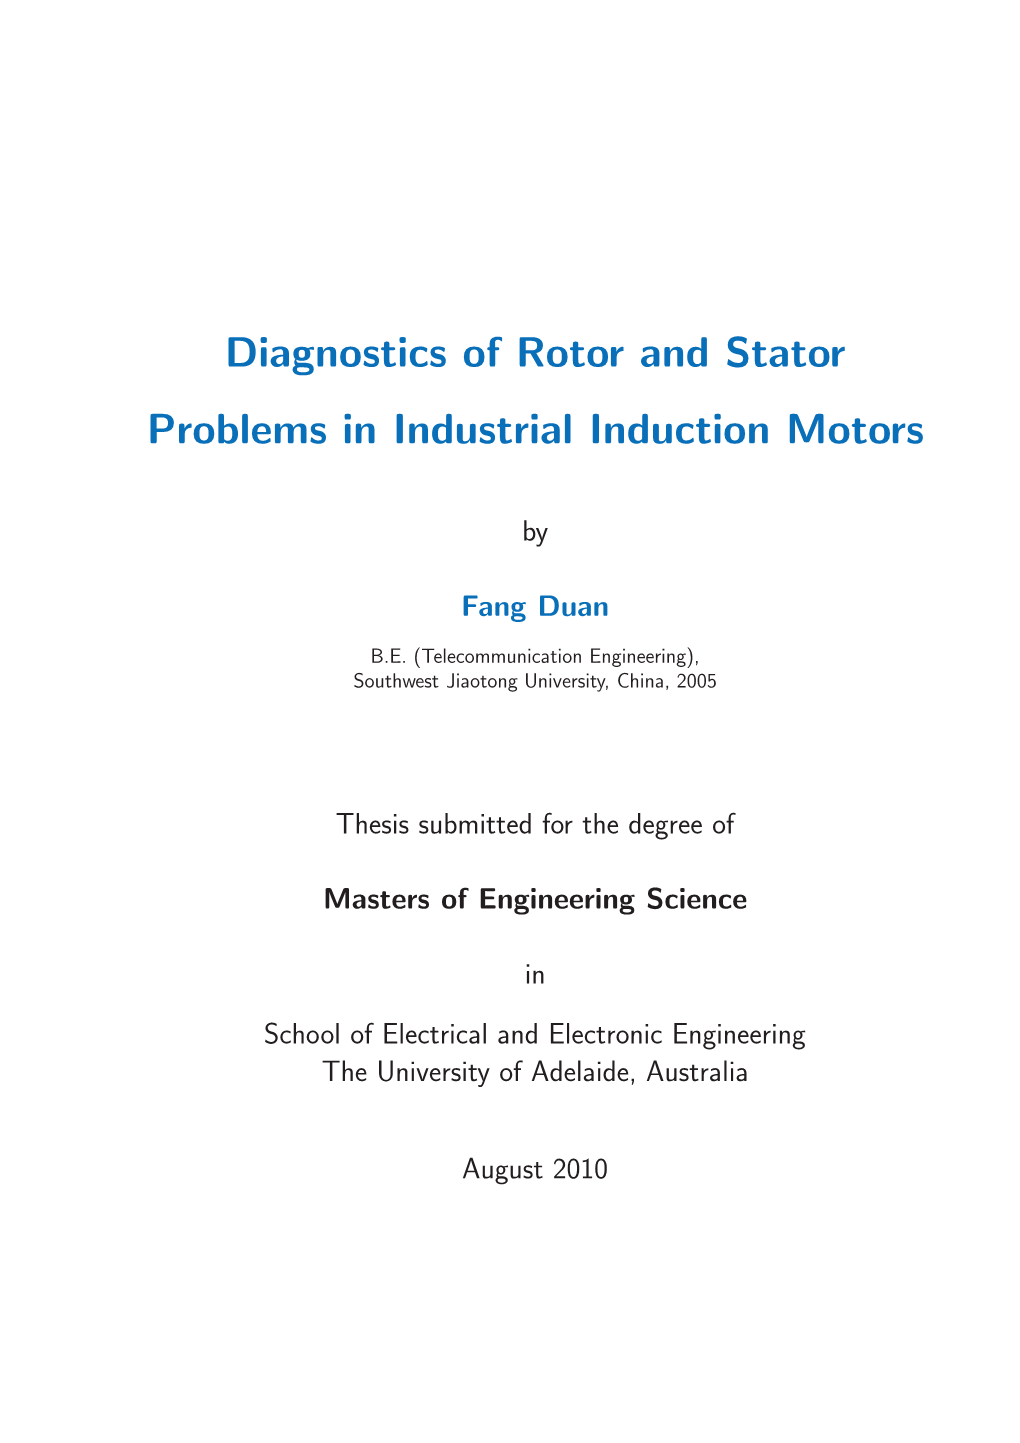 Diagnostics of Rotor and Stator Problems in Industrial Induction Motors